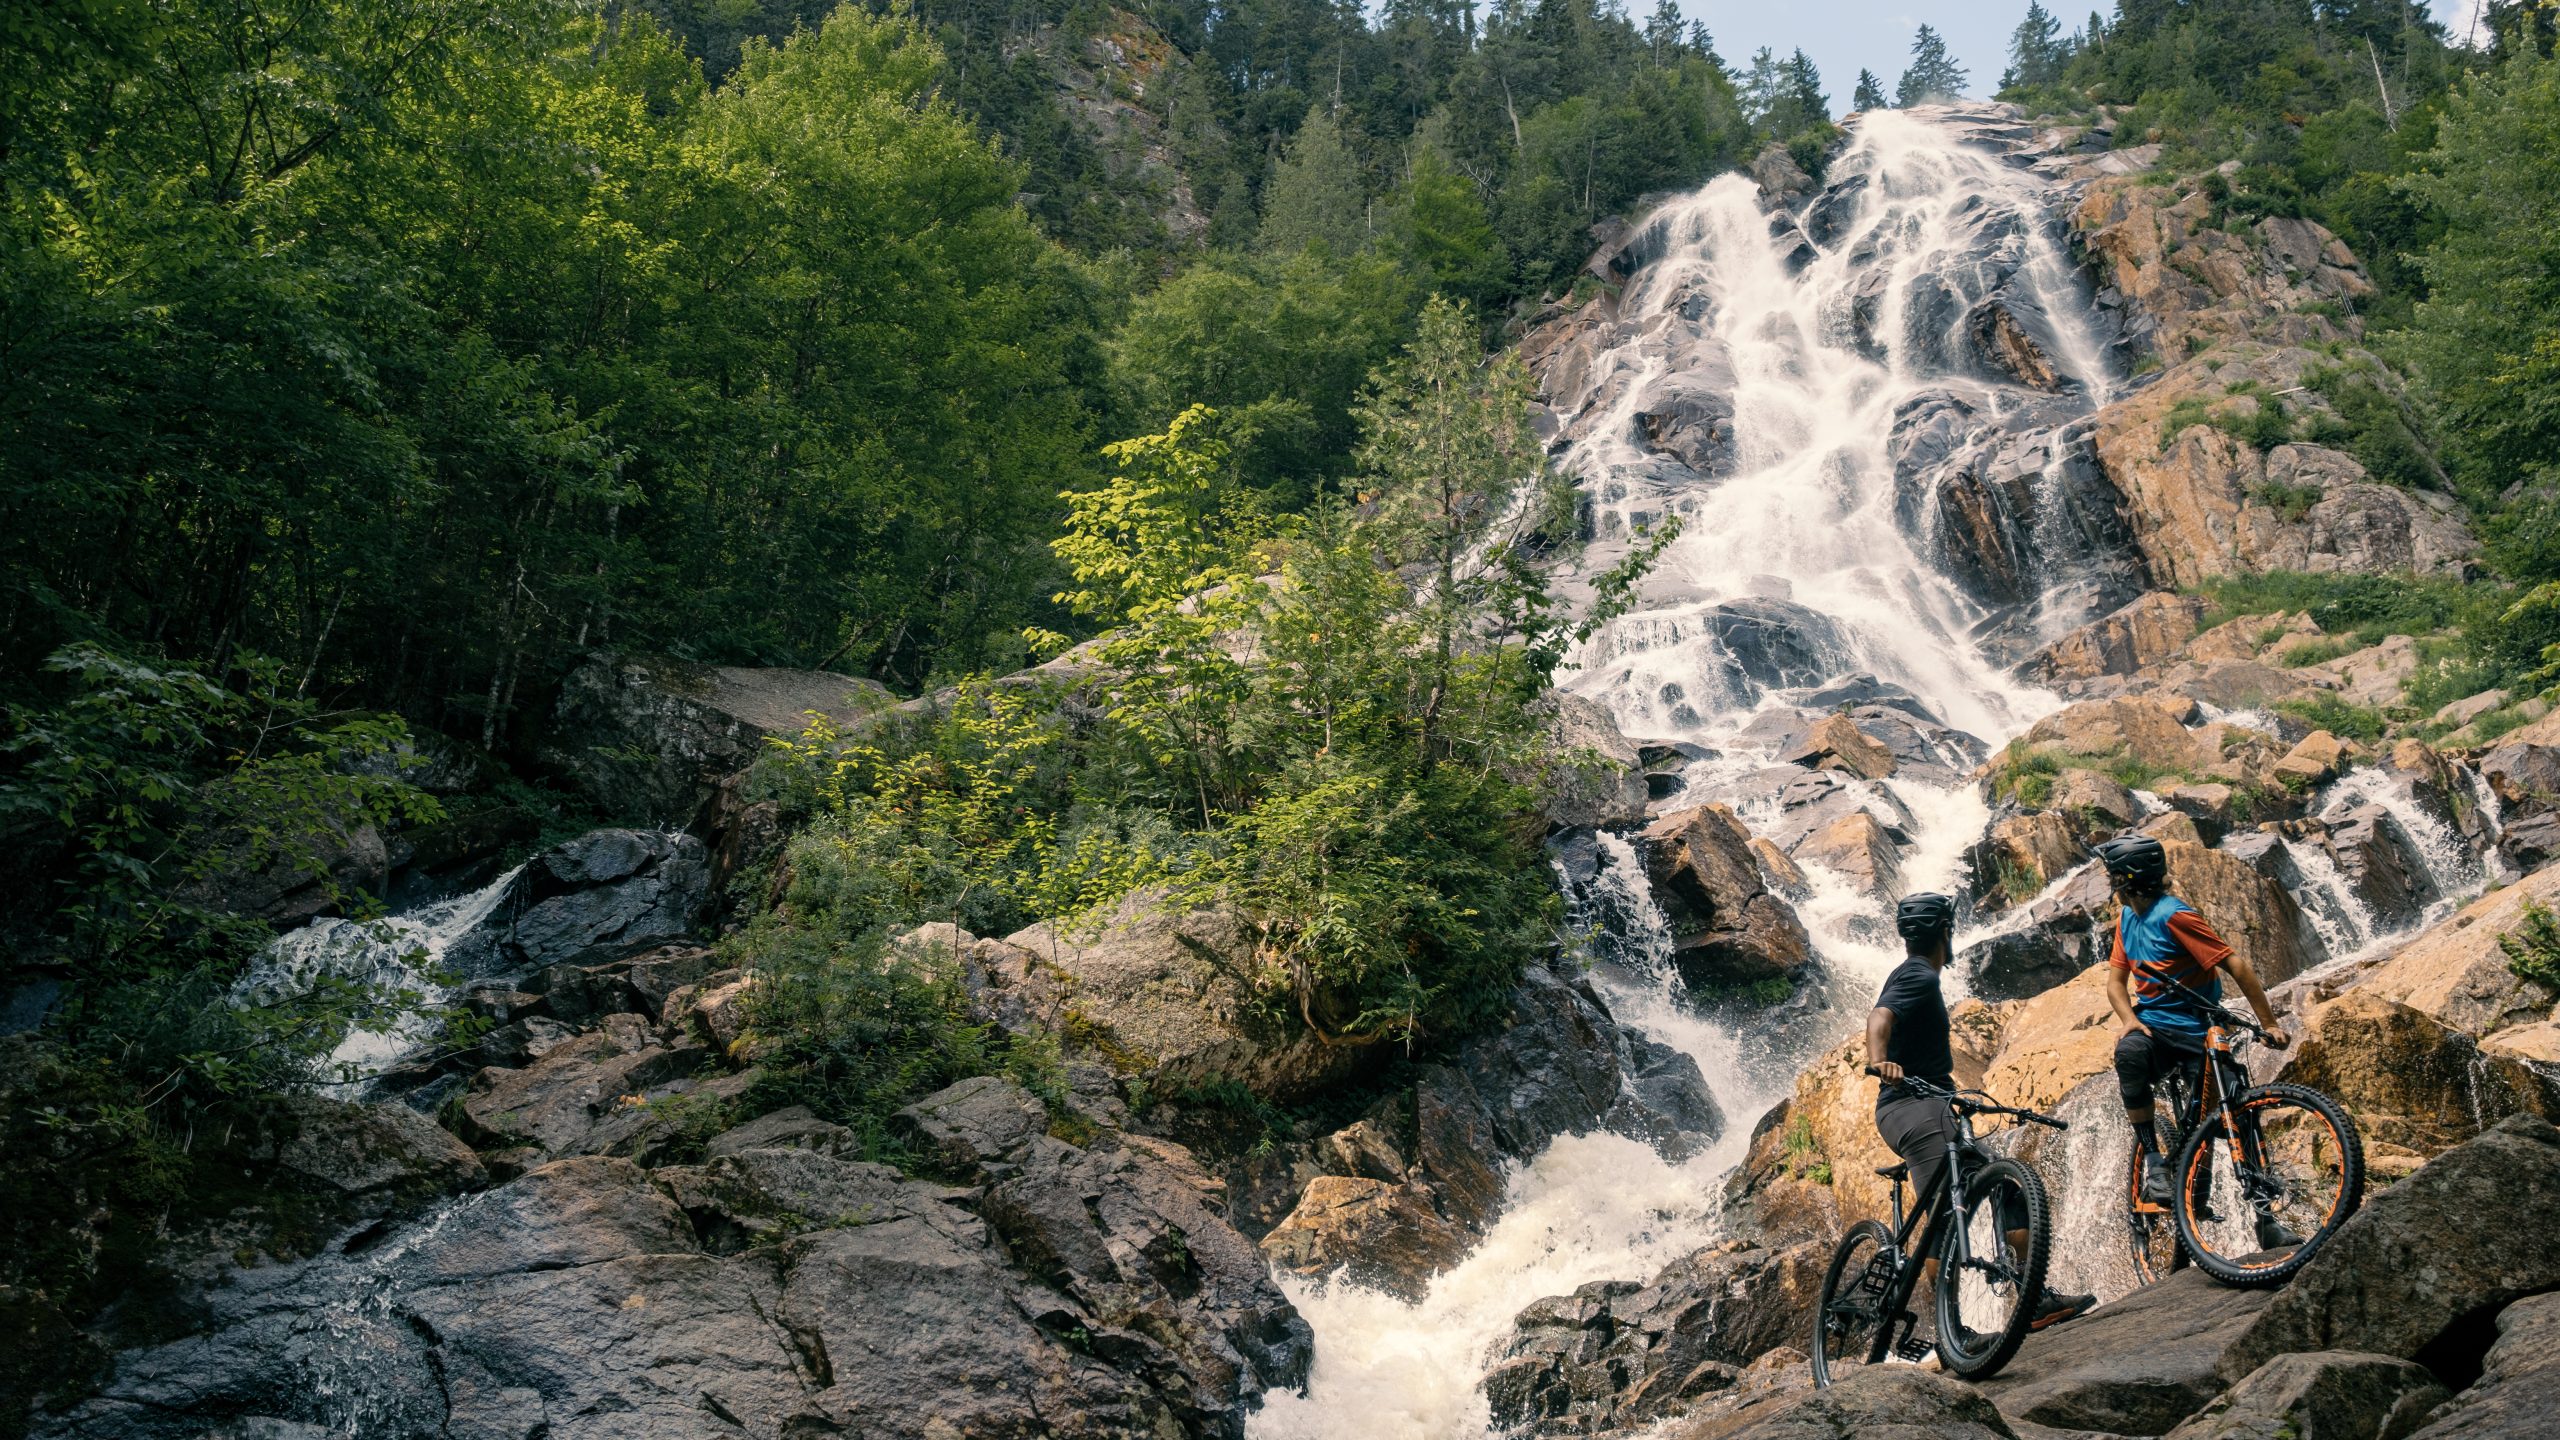 Two cyclists taking an outdoor break while admiring Delaney Falls, surrounded by nature, one of the landscapes visible when practicing sports such as mountain biking in the Valley.